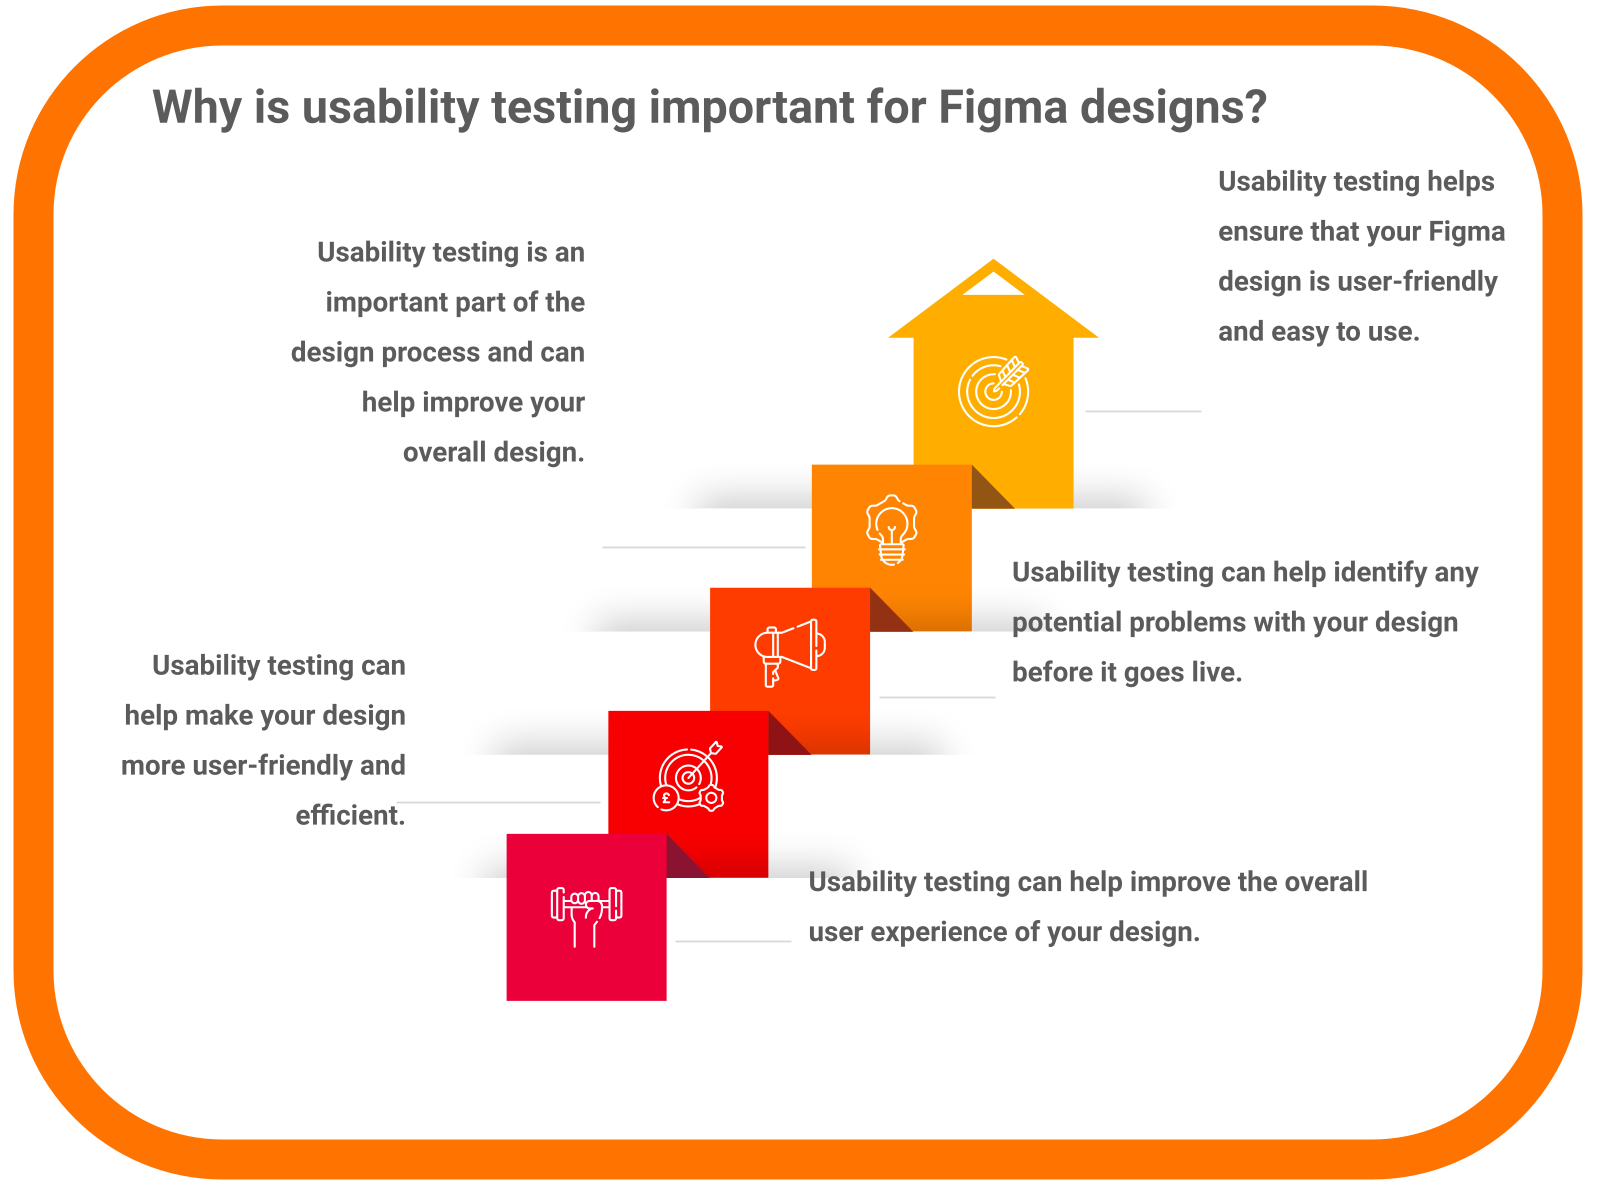 Why is usability testing important for Figma designs?